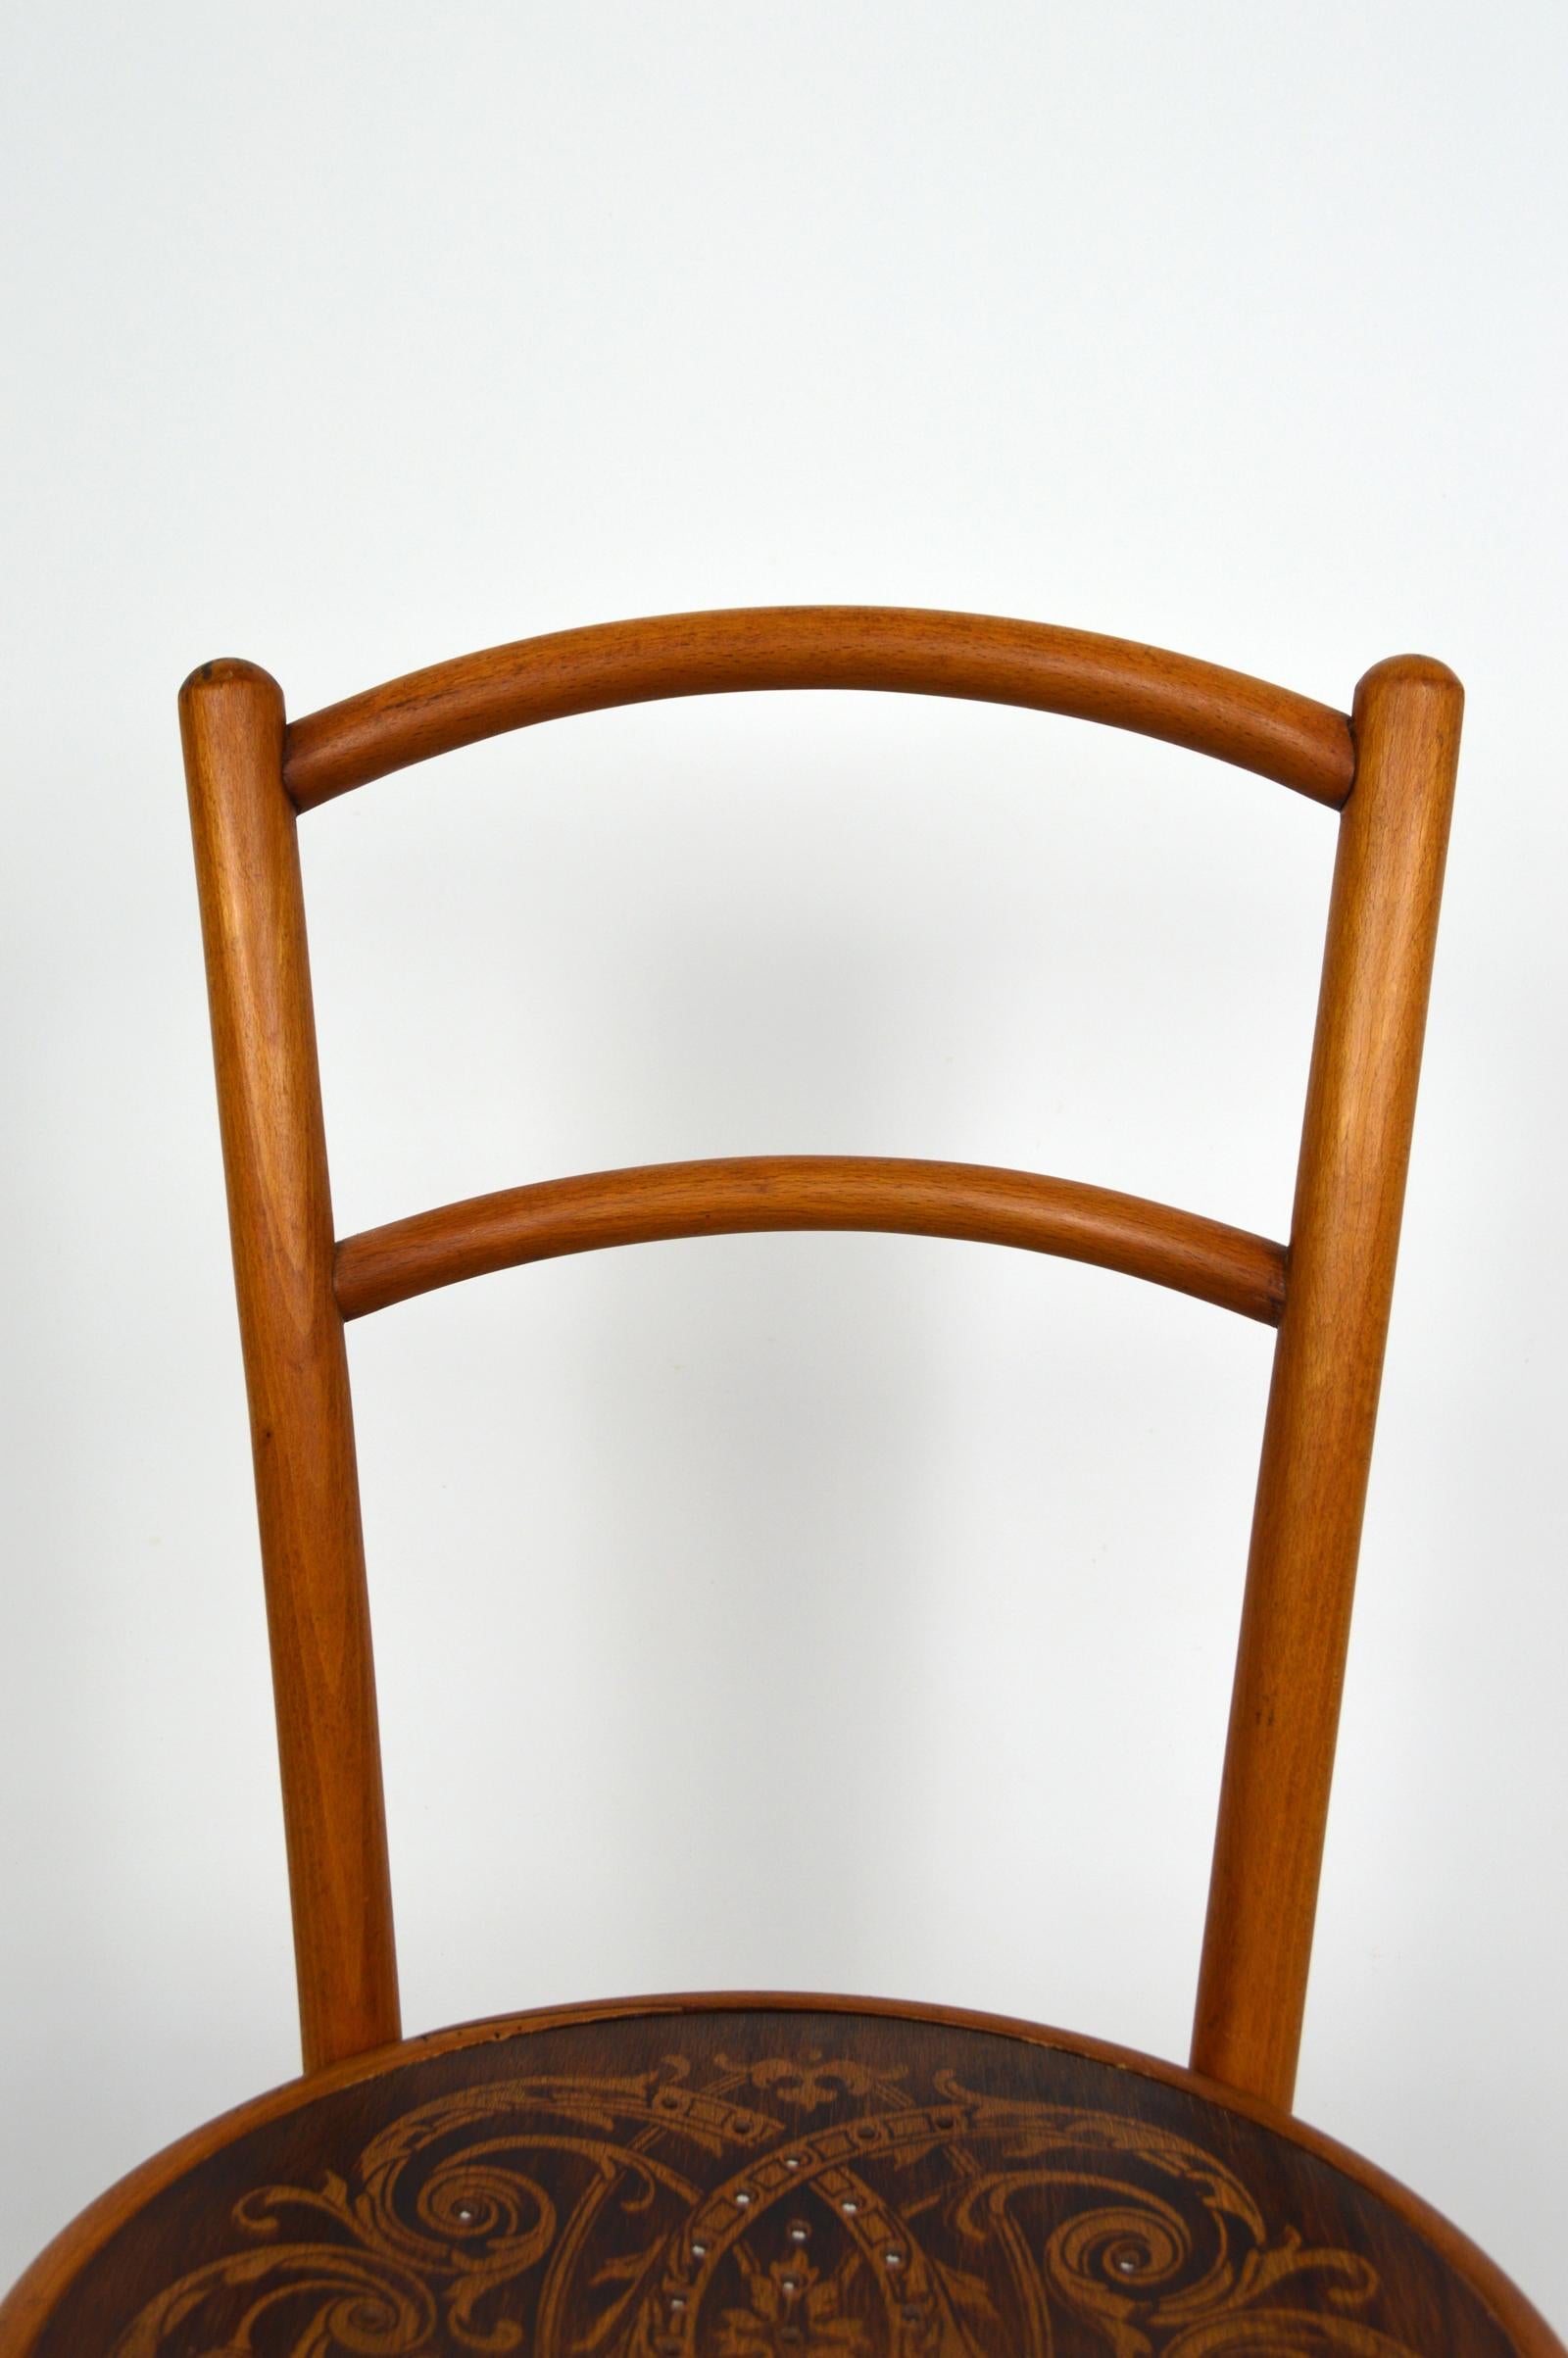 Austrian Art Nouveau Bentwood Chair with Patterned Seat, J. & J. Kohn, 1900s In Good Condition For Sale In L'Etang, FR